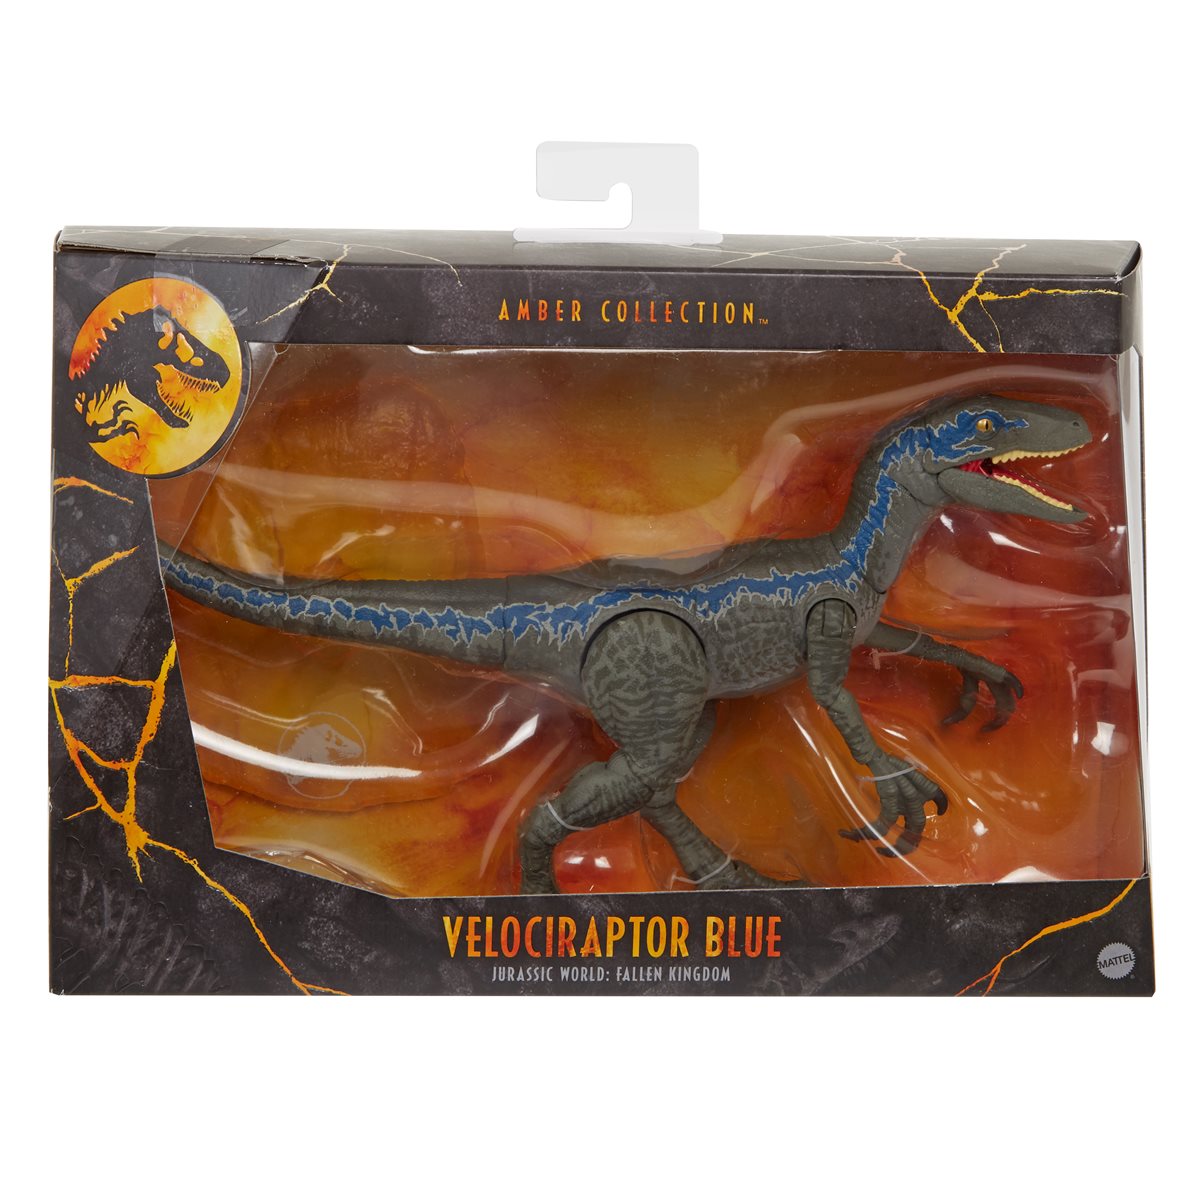 Jurassic World Velociraptor Blue 6 Inch Scale Amber Collection Action Figure